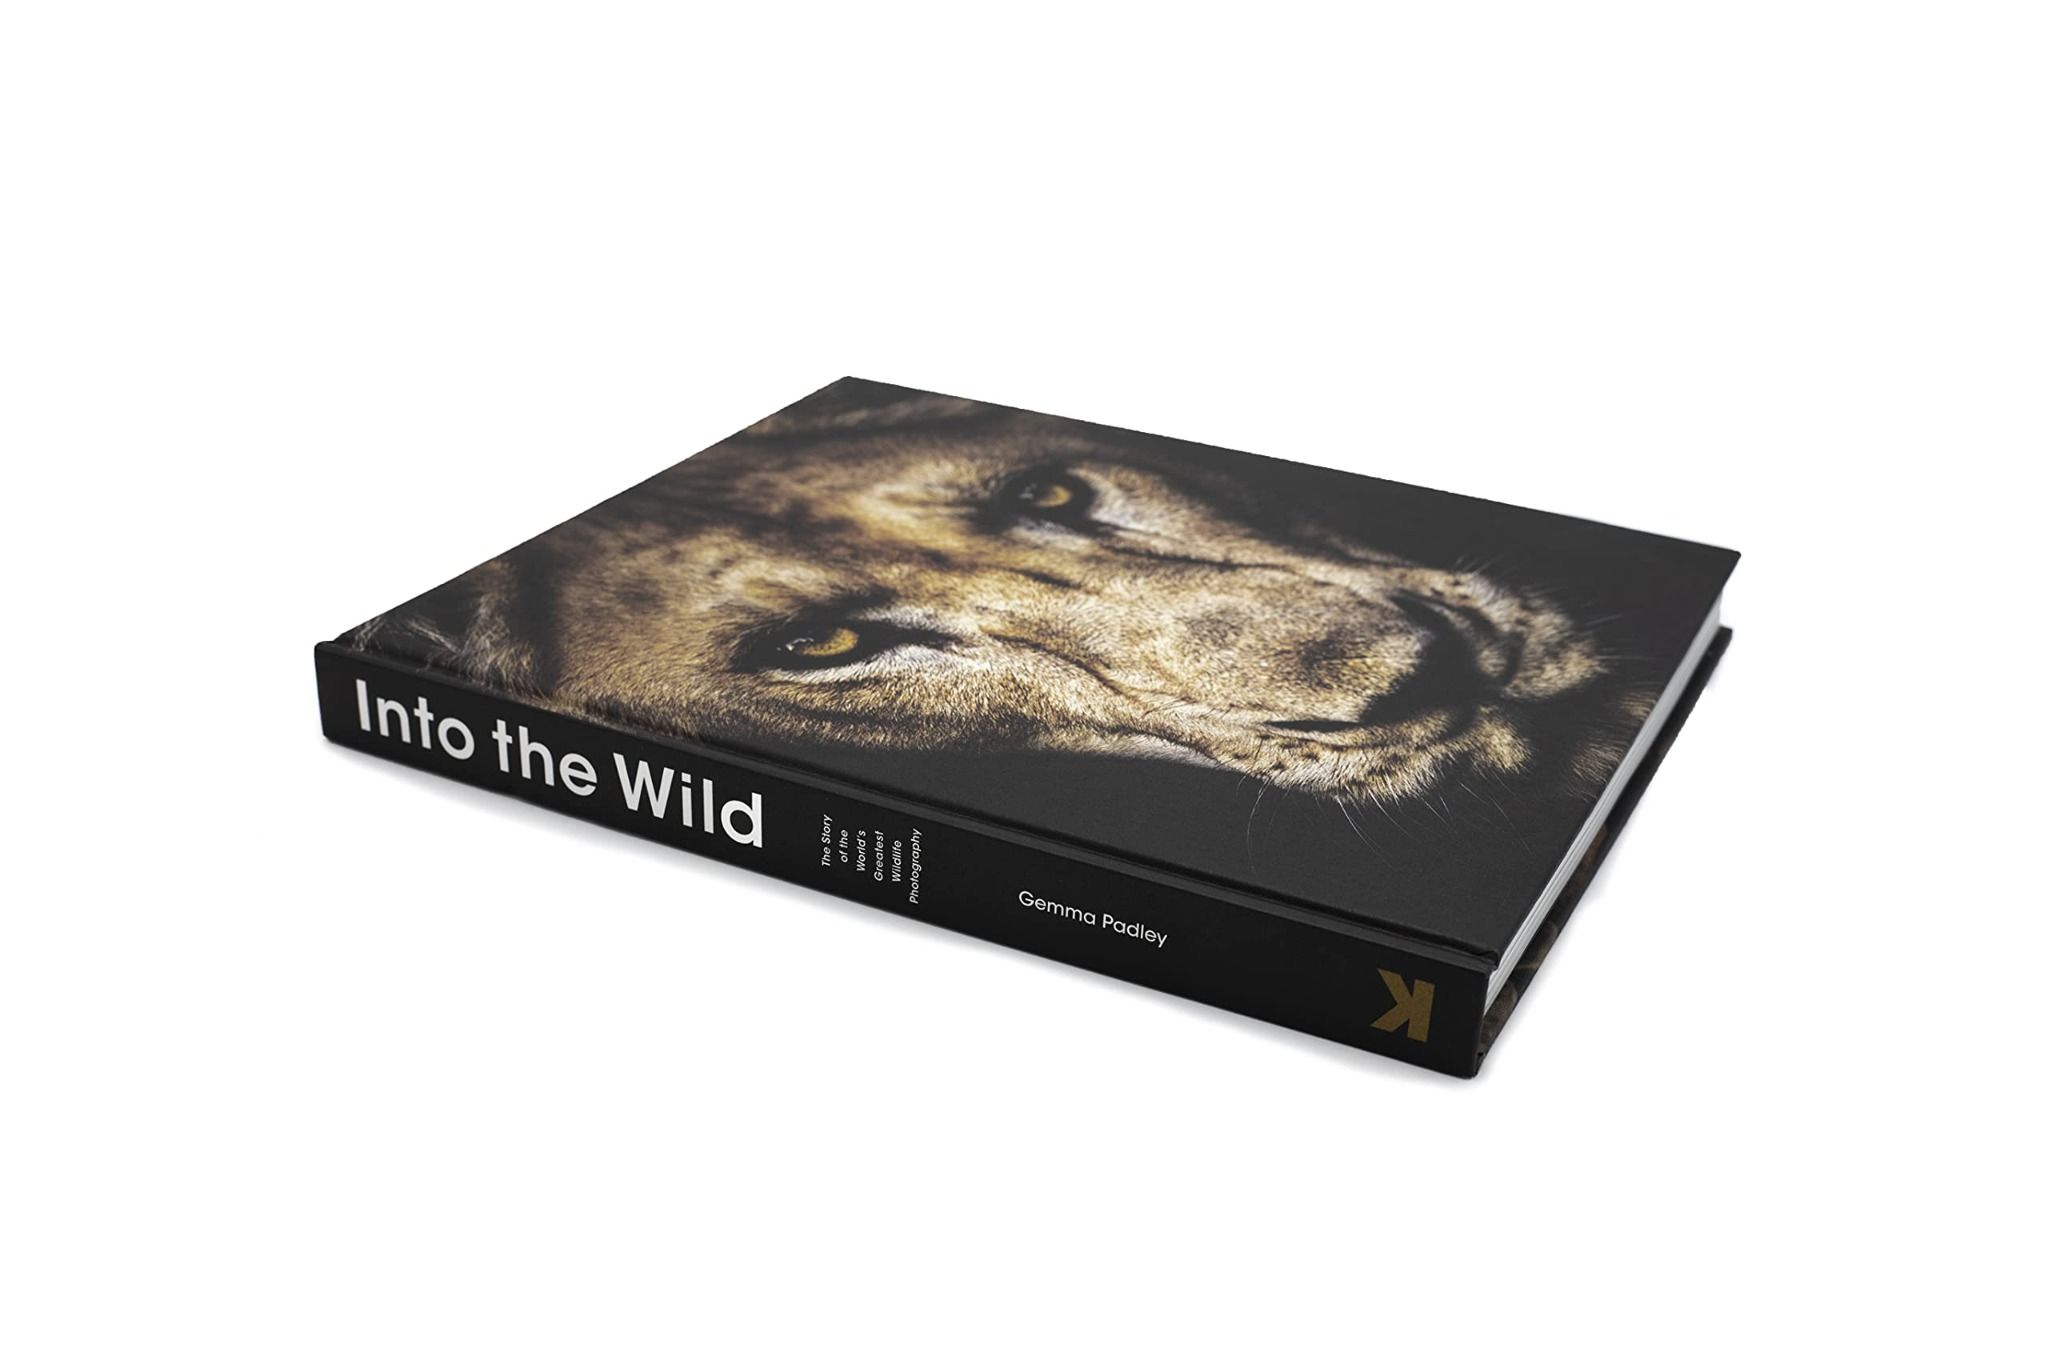  Into The Wild_Gemma Padley_9781913947484_Laurence King Publishing 